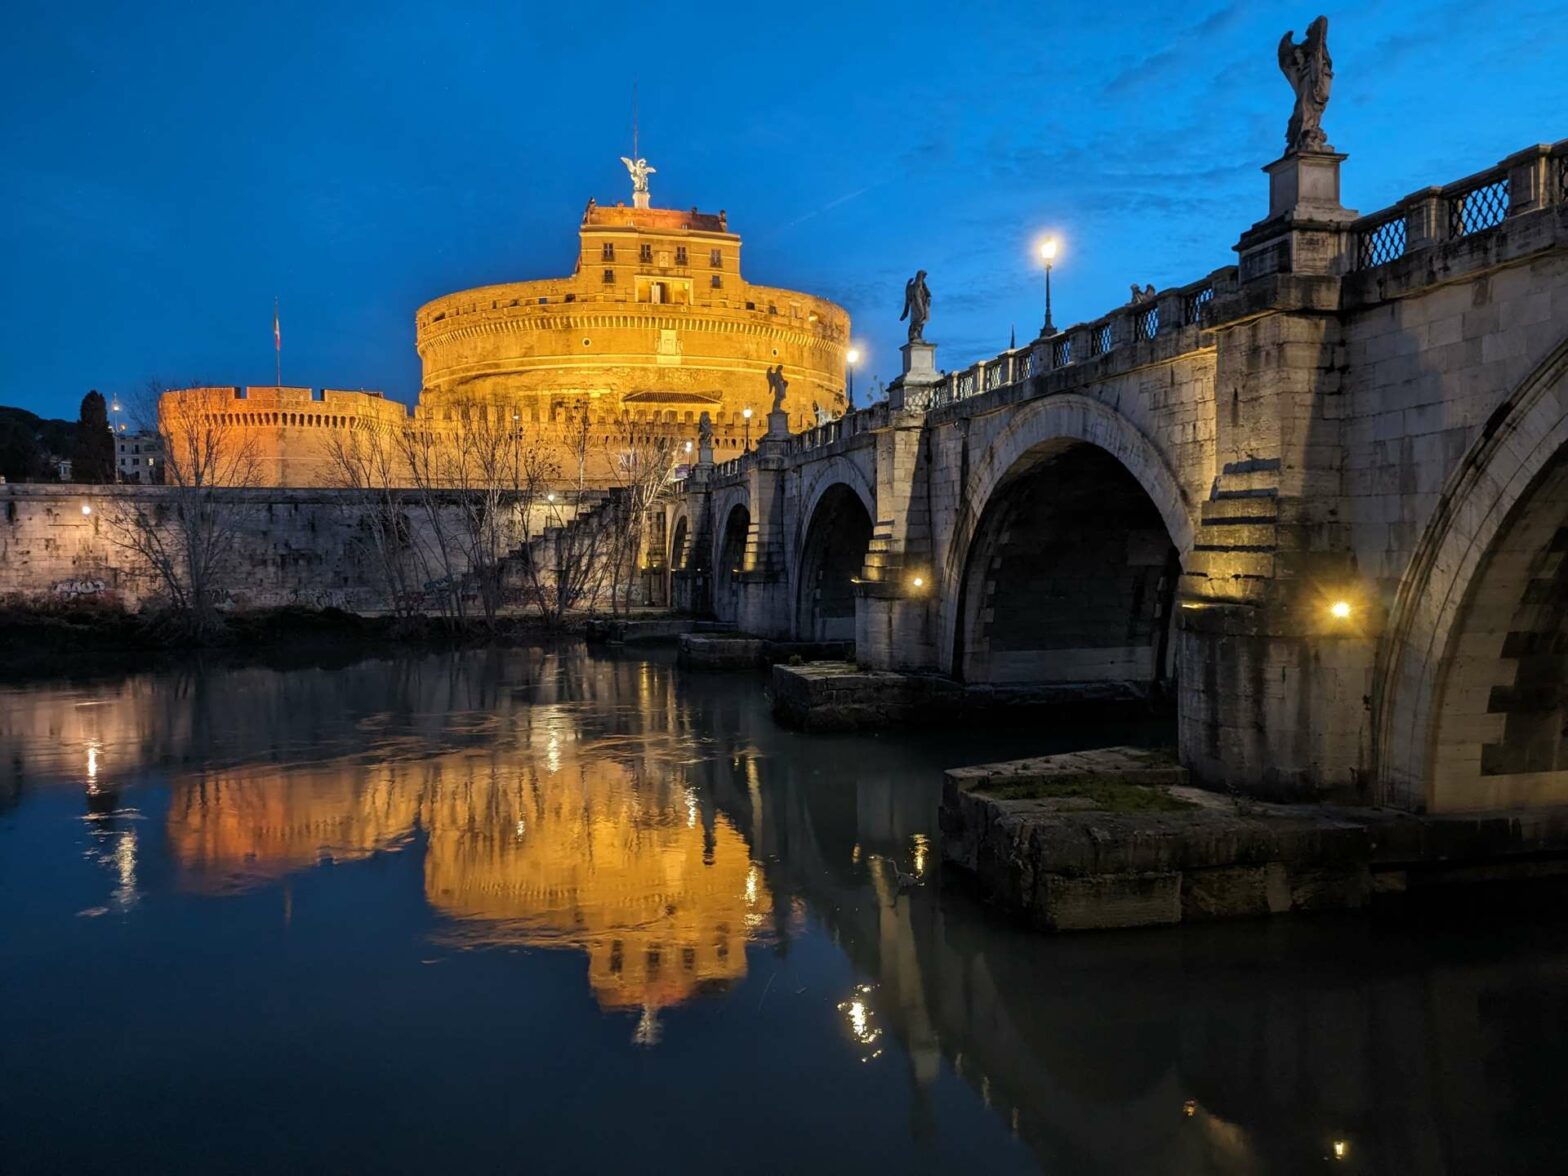 Castel Sant'Angelo at Nighttime